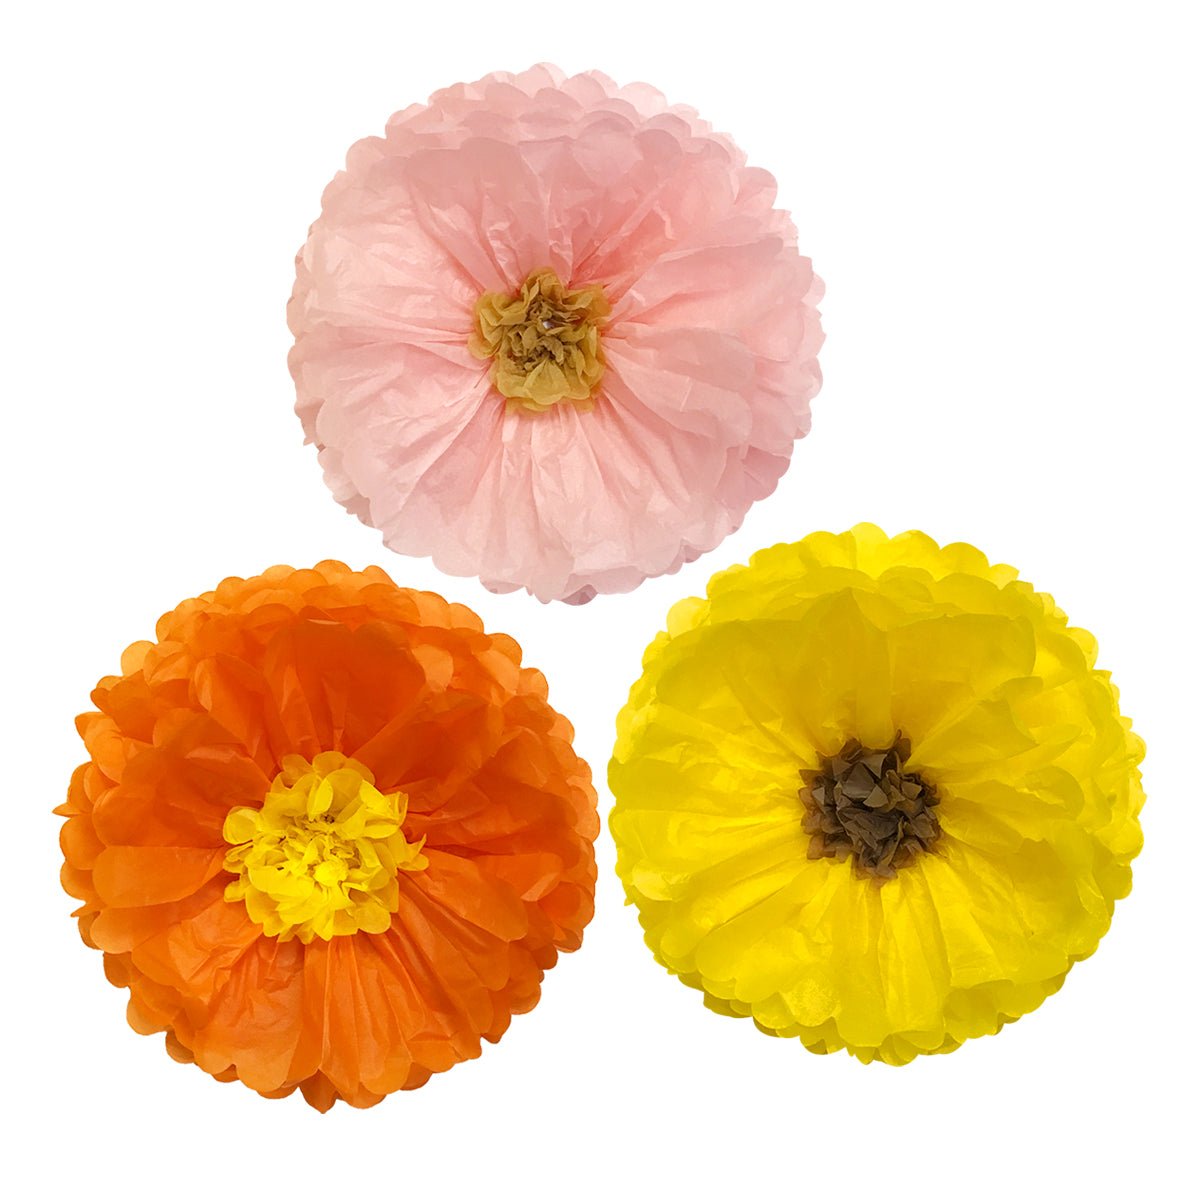 Wrapables Set of 3 Tissue Flower Pom Poms Party Decorations for Weddings, Birthday Parties Baby Showers and Nursery Decor